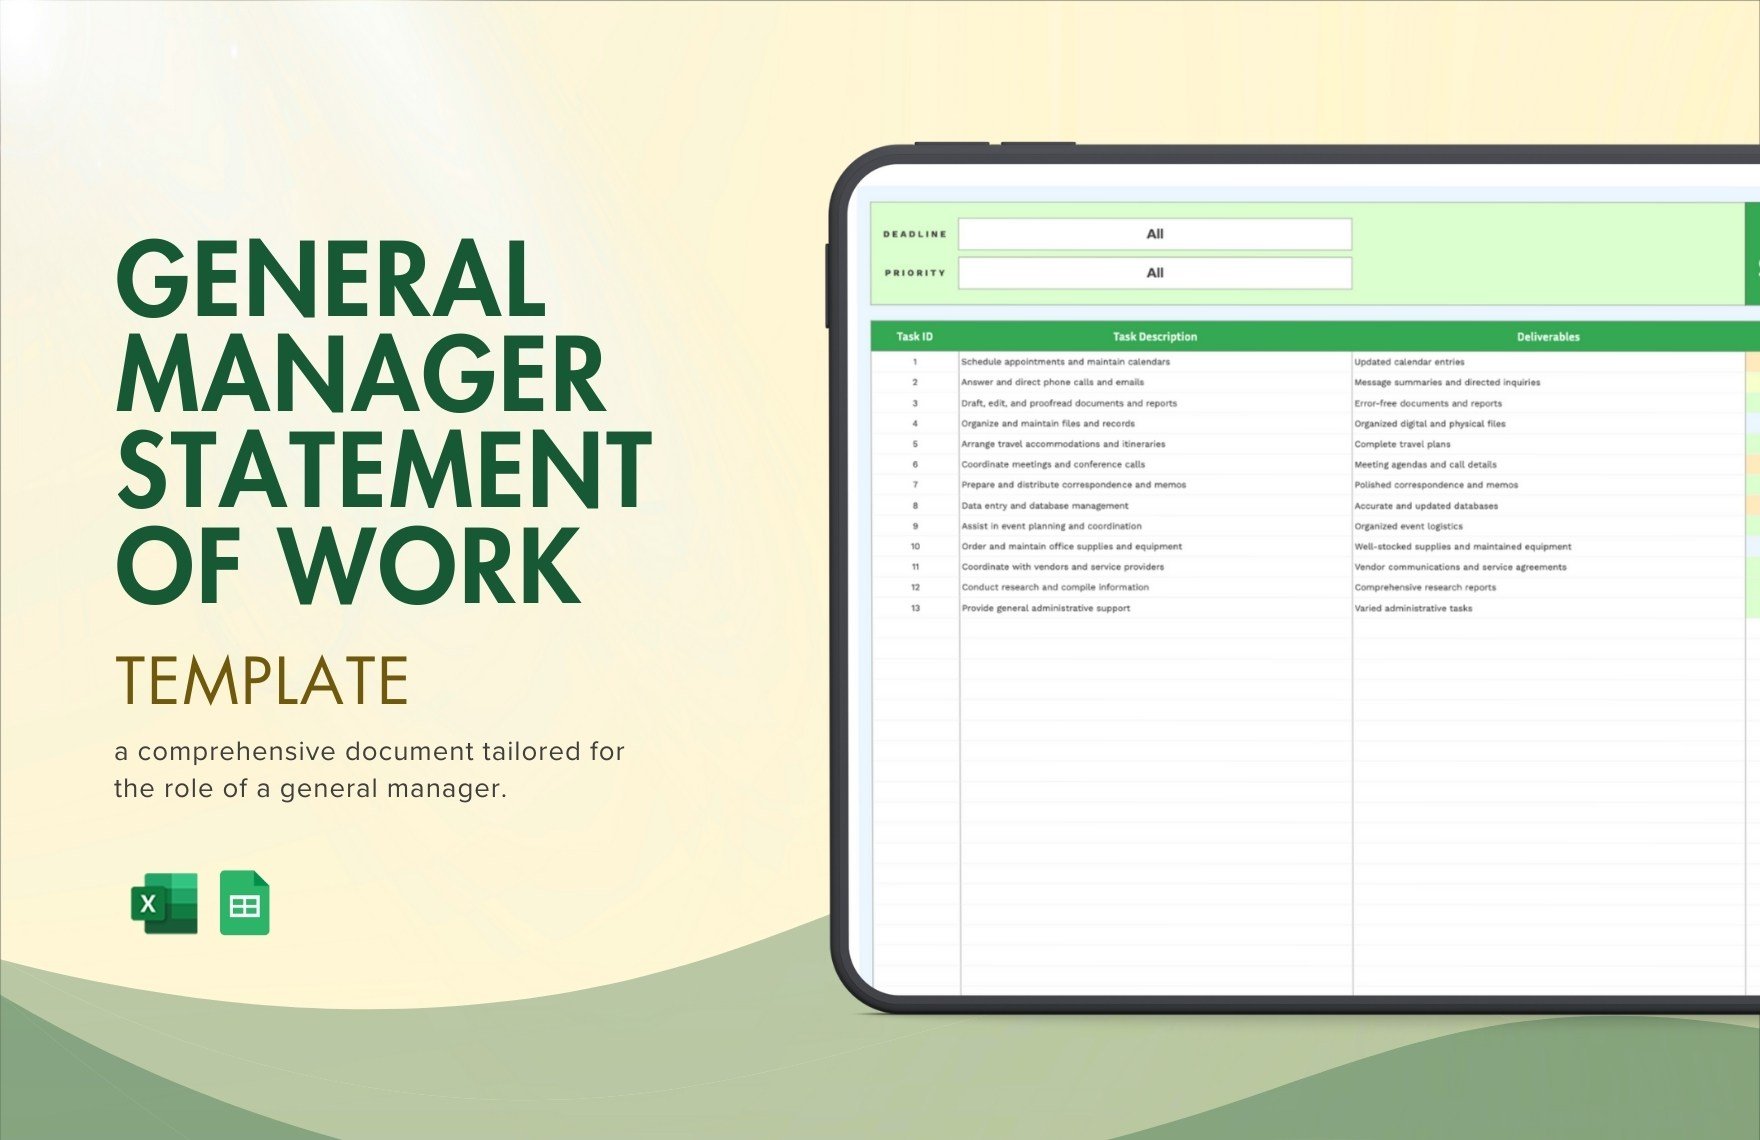 General Manager Statement of Work Template